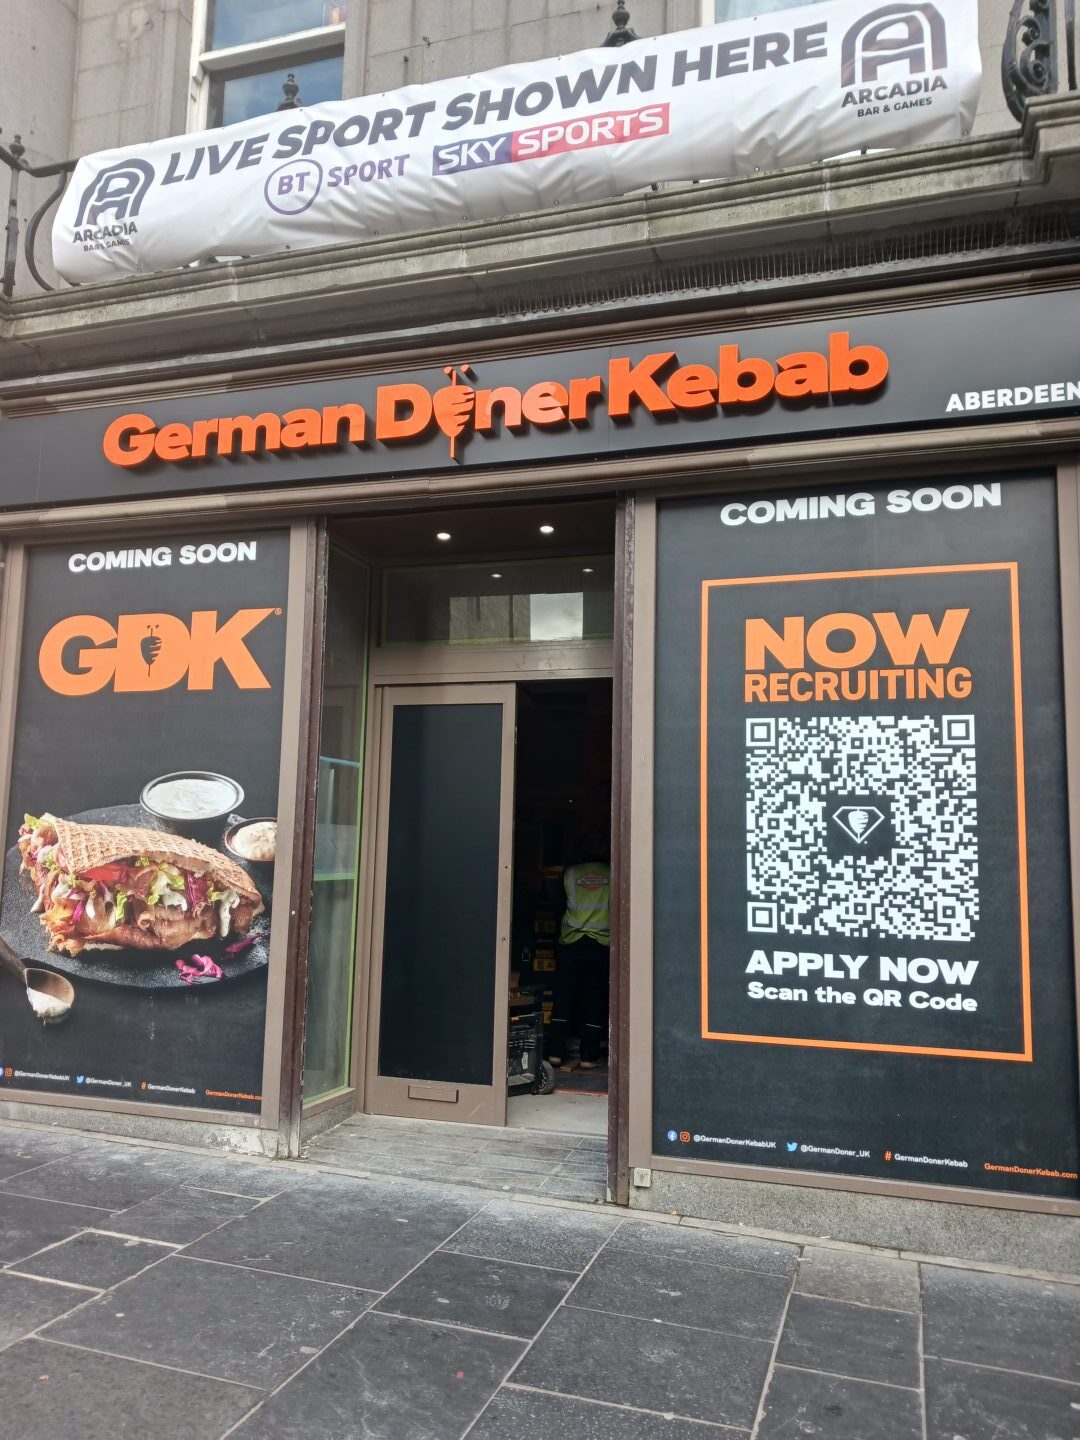 The outside of the new German Doner Kebab shop